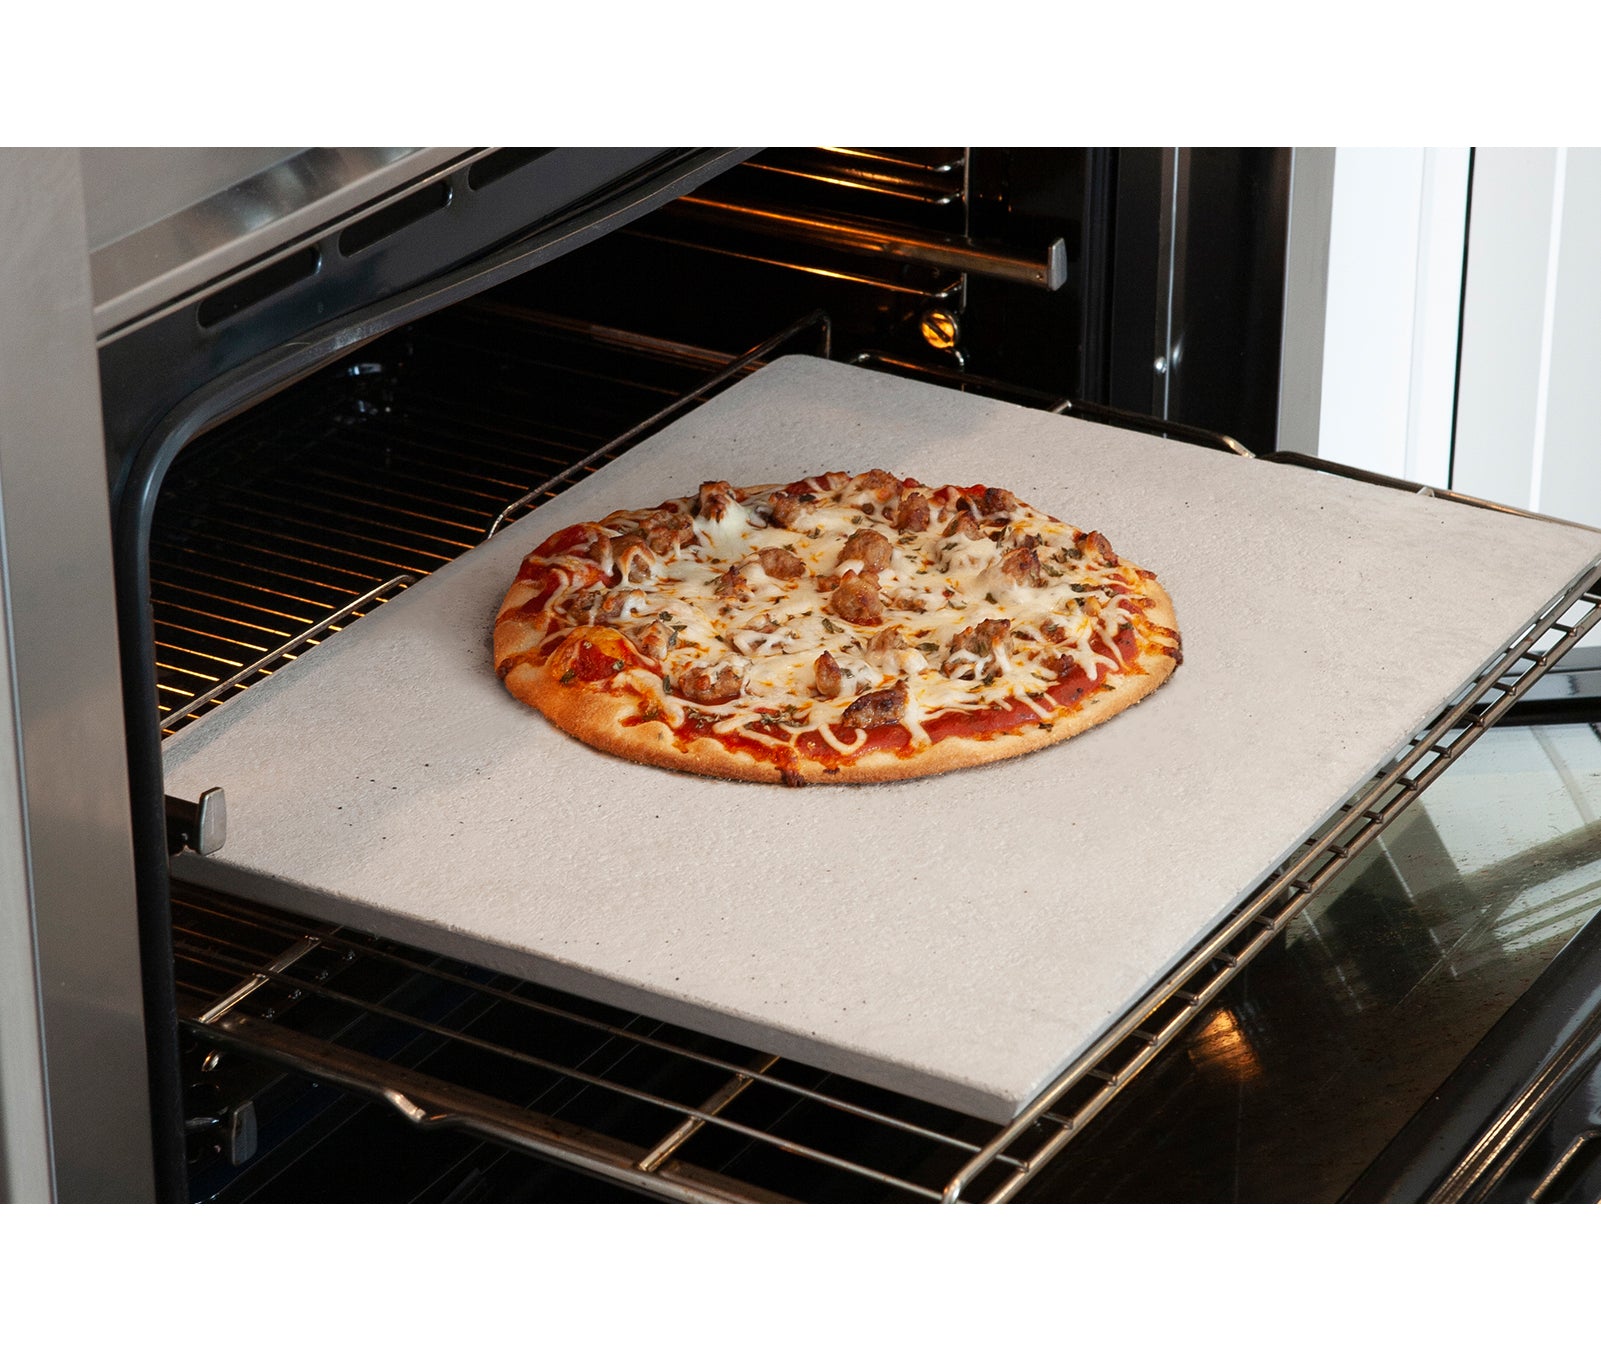 Home Oven Baking Stone 24" x 18"